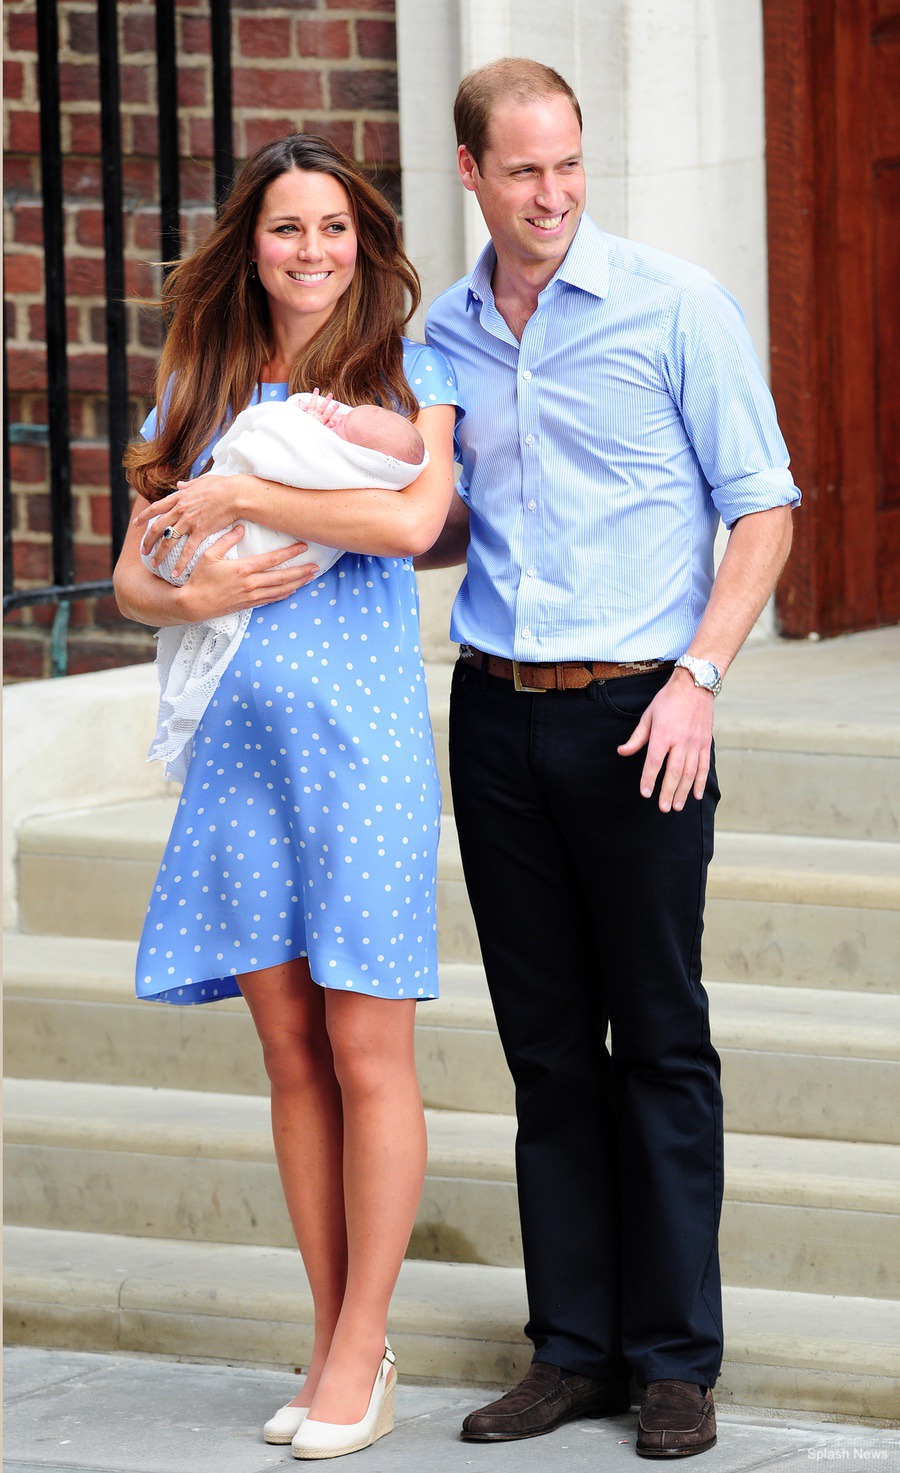 Kate Middleton wears white wedges during the photocall after the birth of her first baby, Prince George of Cambridge